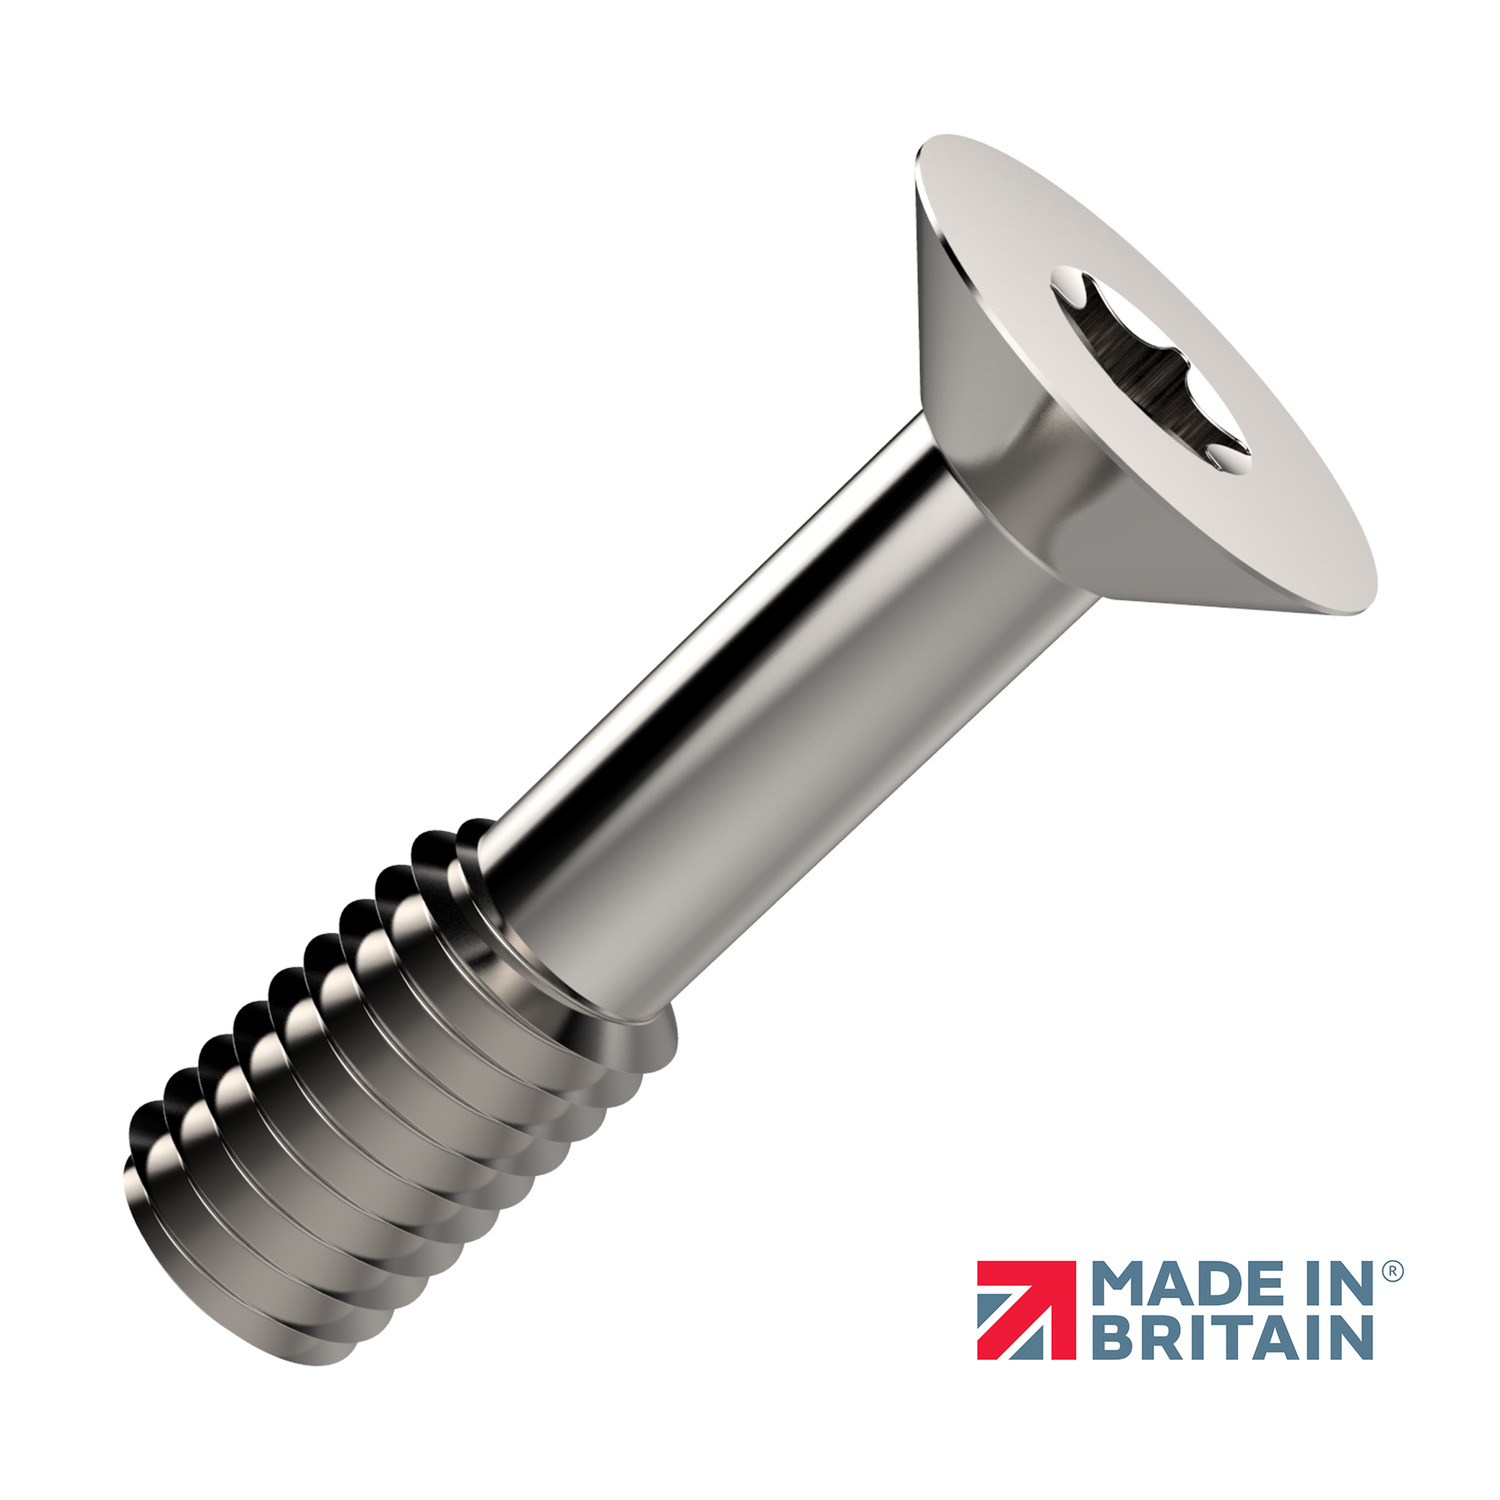 Captive Screws - Countersunk Torx countersunk captive screws available in AISI 303 and AISI 316 stainless steel, blackened stainless steel and Titanium.